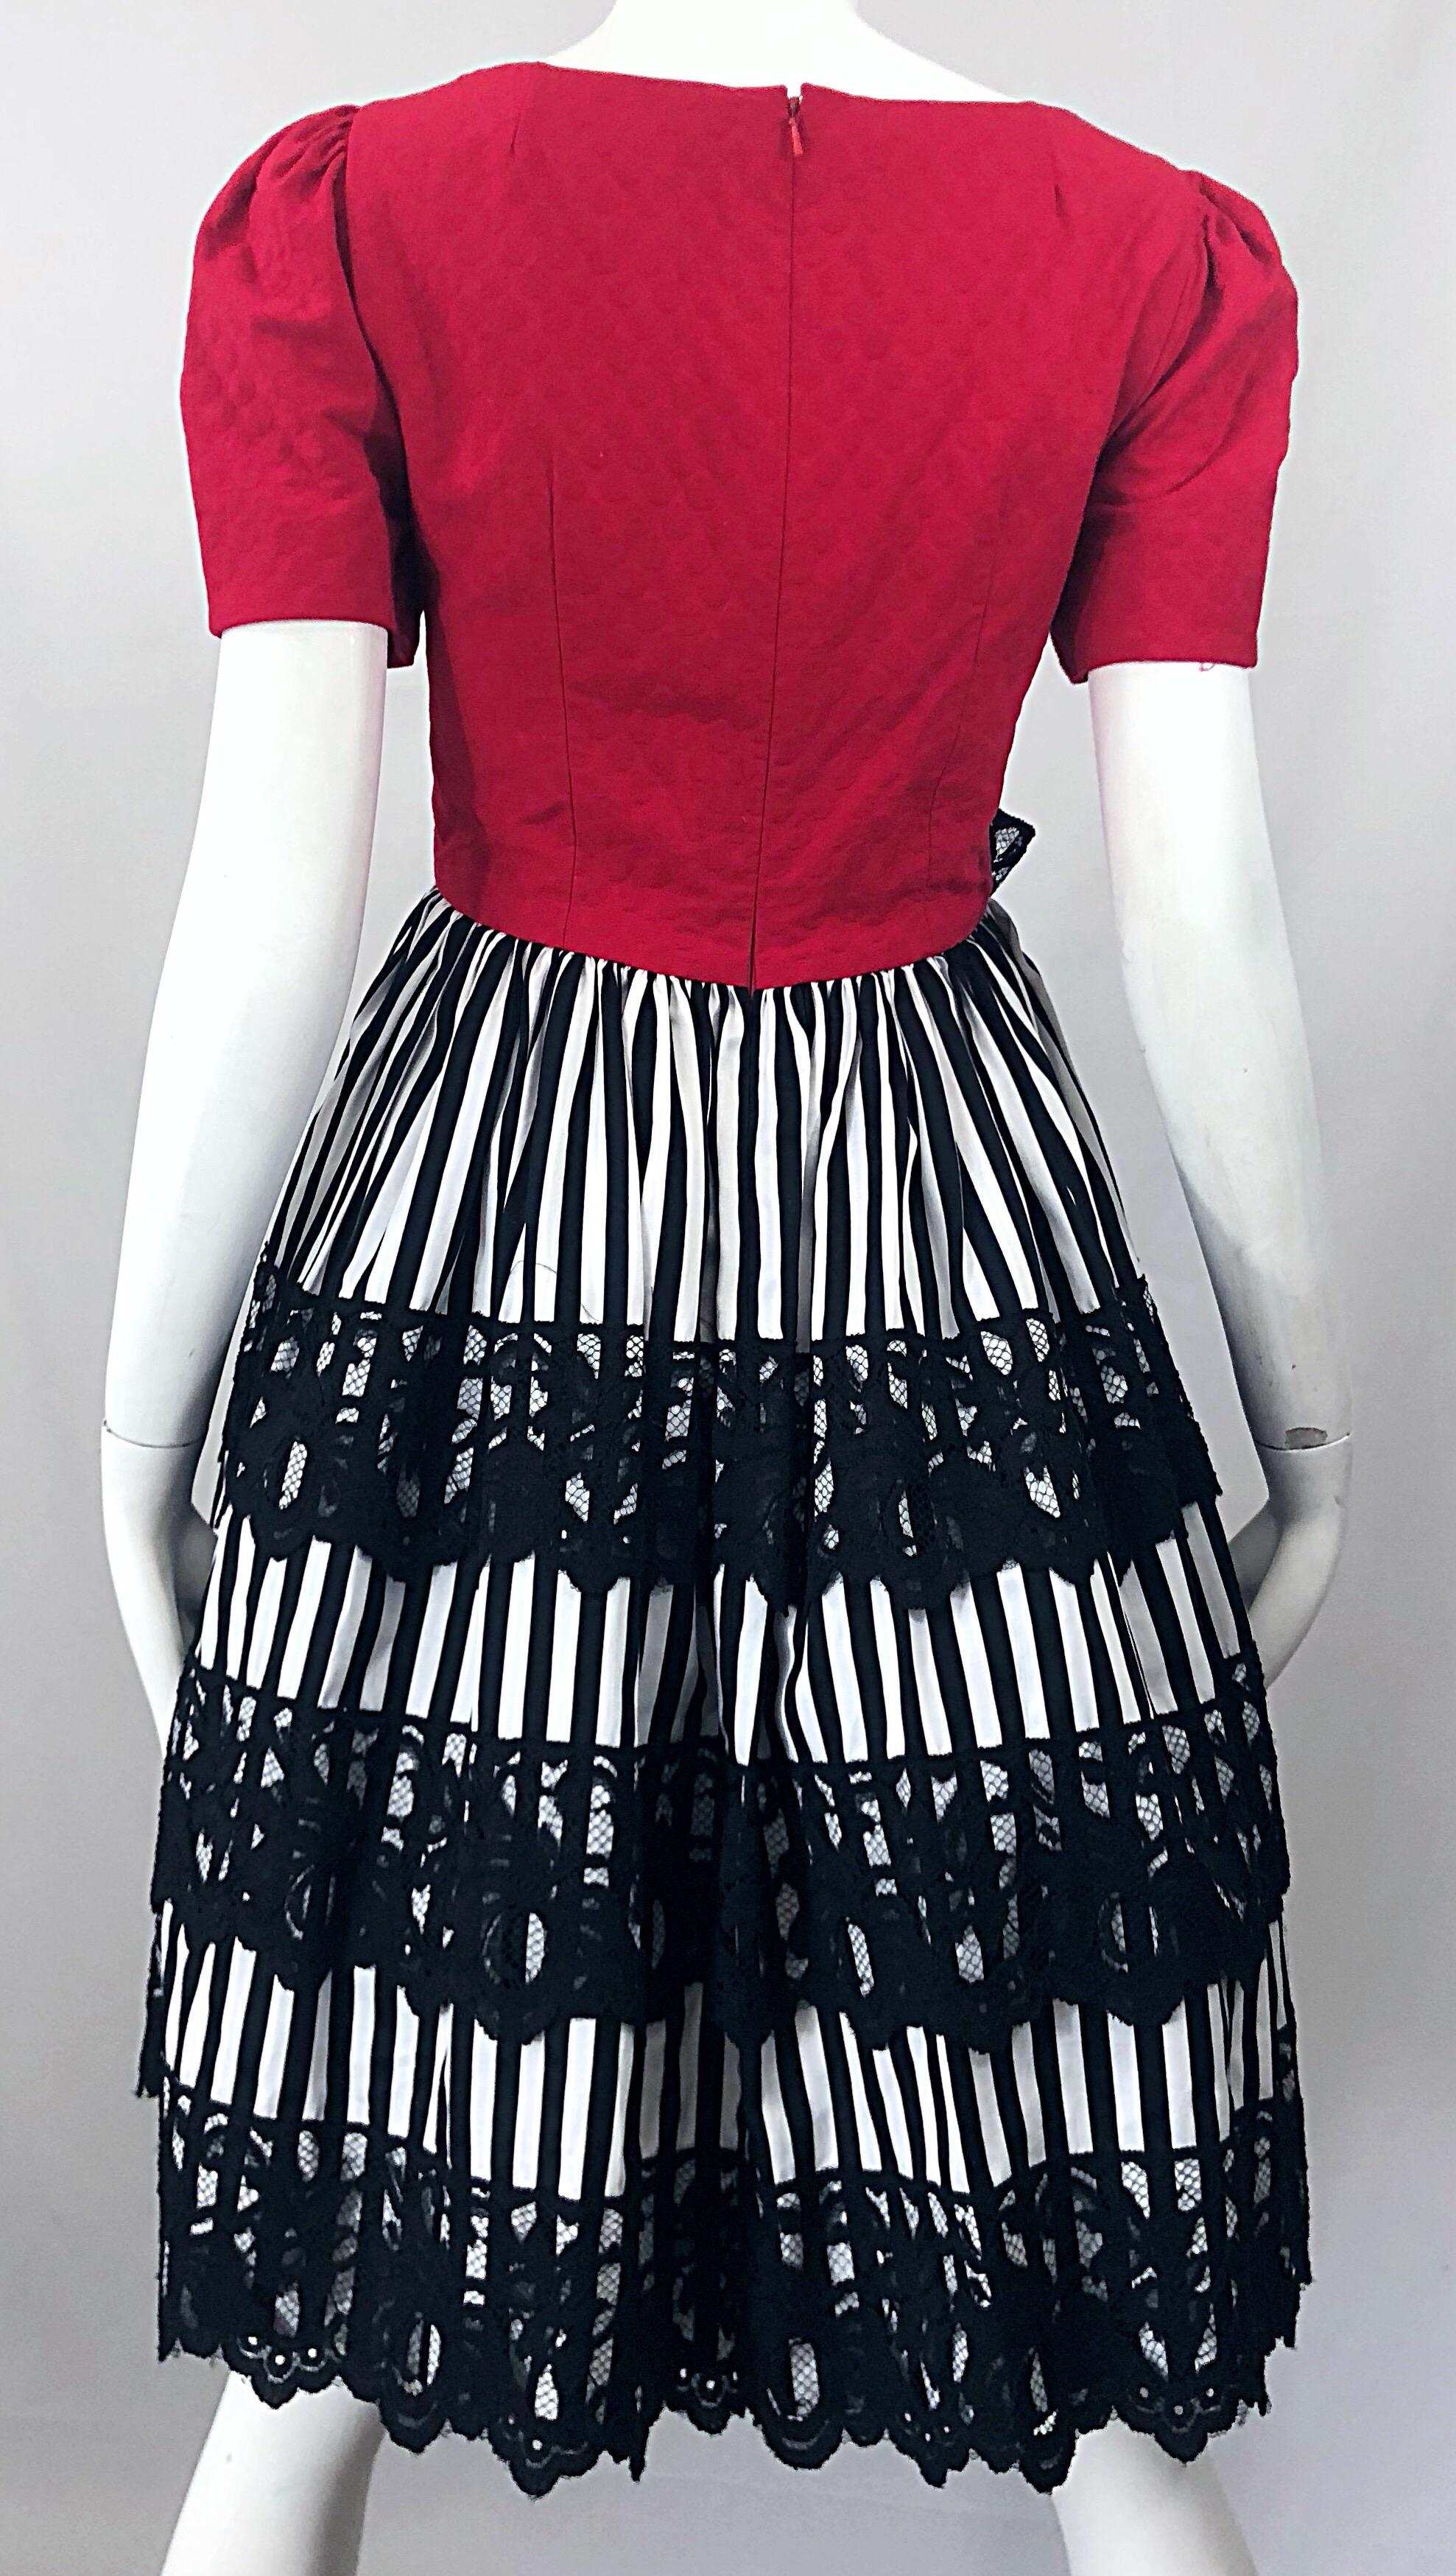 Vintage Adele Simpson 1980s Red Black White Fit n' Flare Empire Bow Lace Dress 7